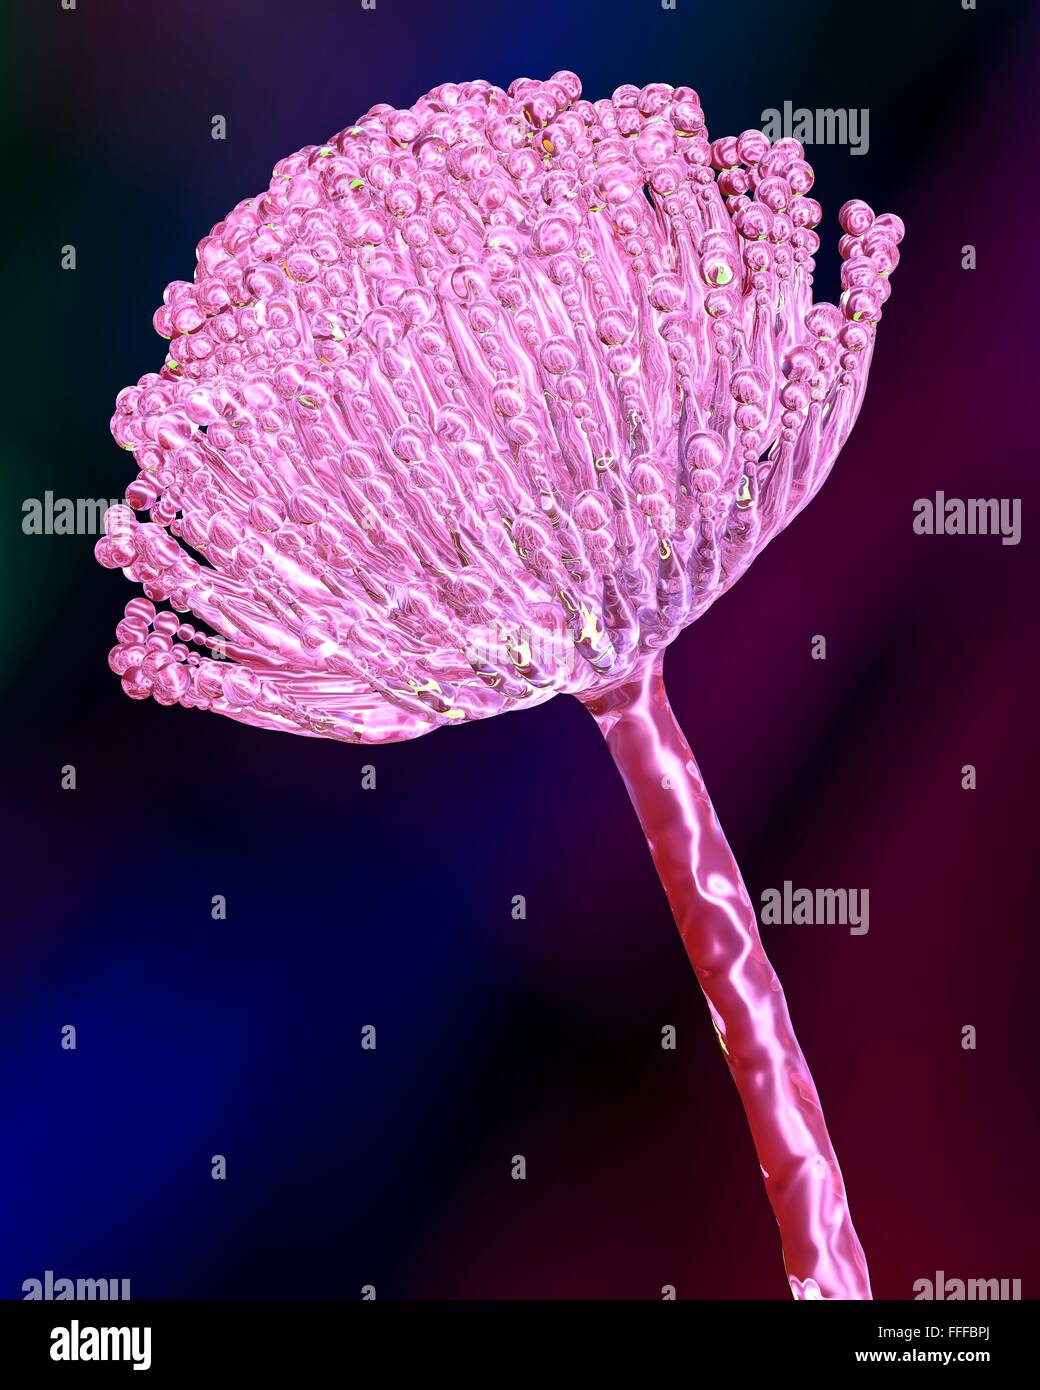 Aspergillus fungus, computer artwork. This is a toxic fungus that causes diseases in humans. These include fungal ear, lung and Stock Photo